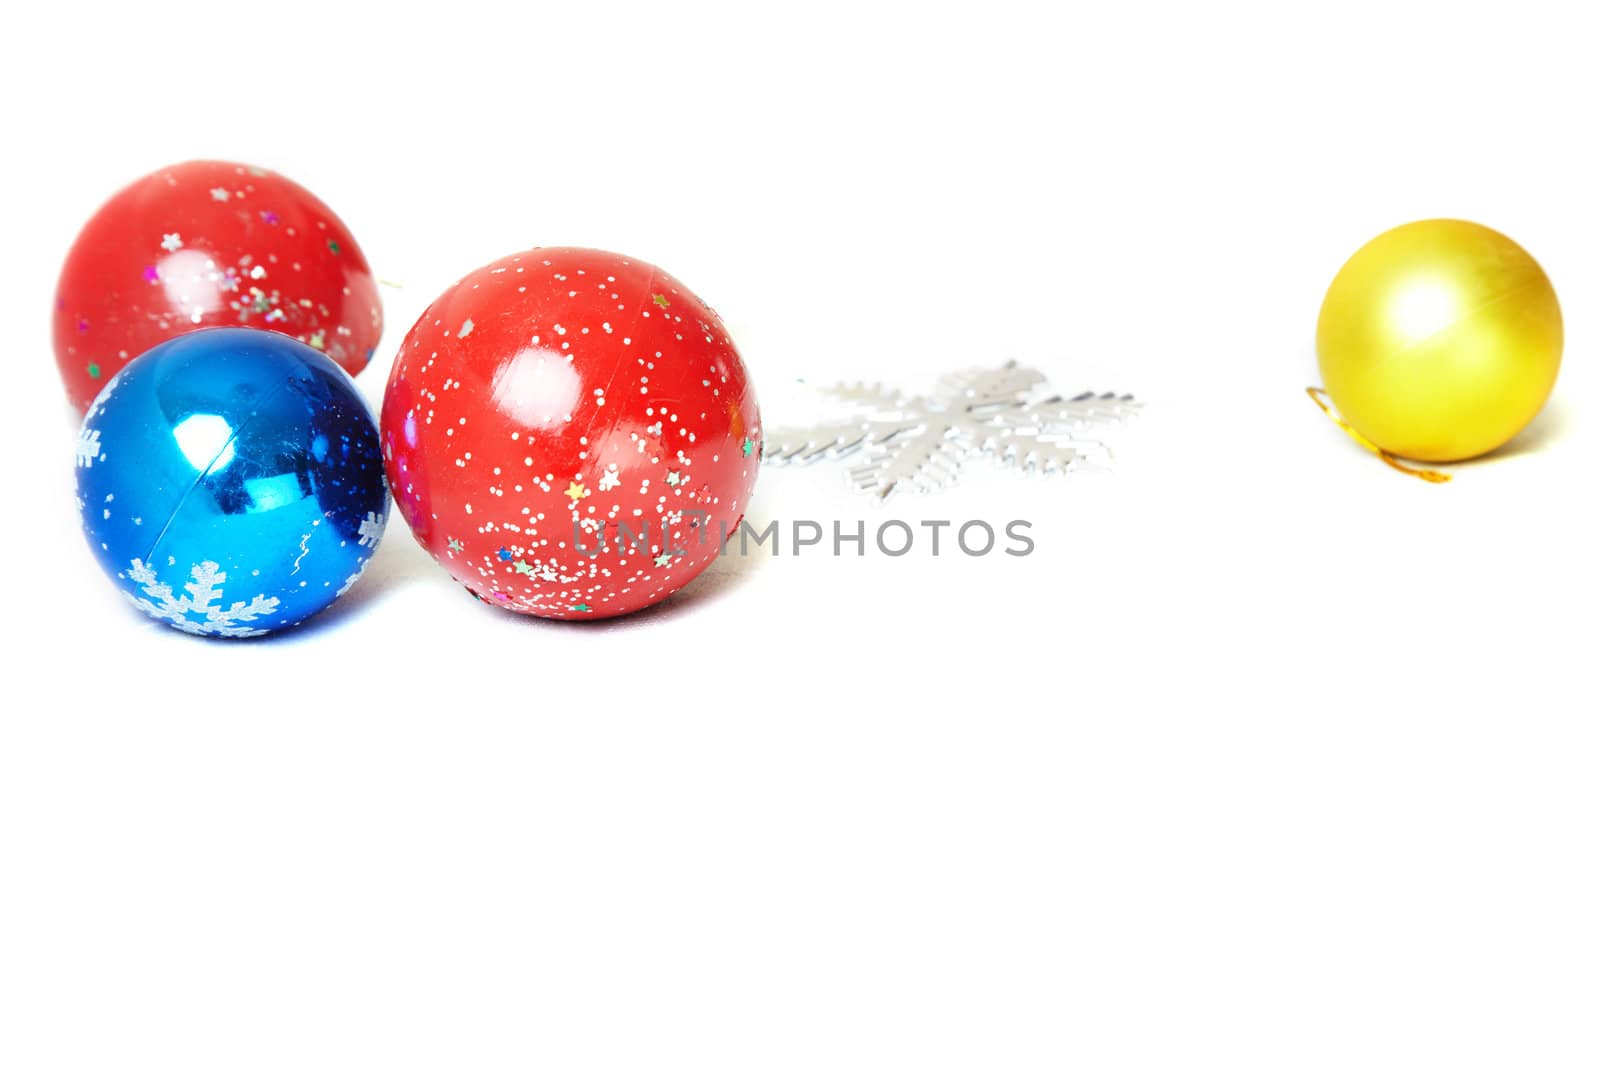 Close-up photo of Christmas toys on a white background